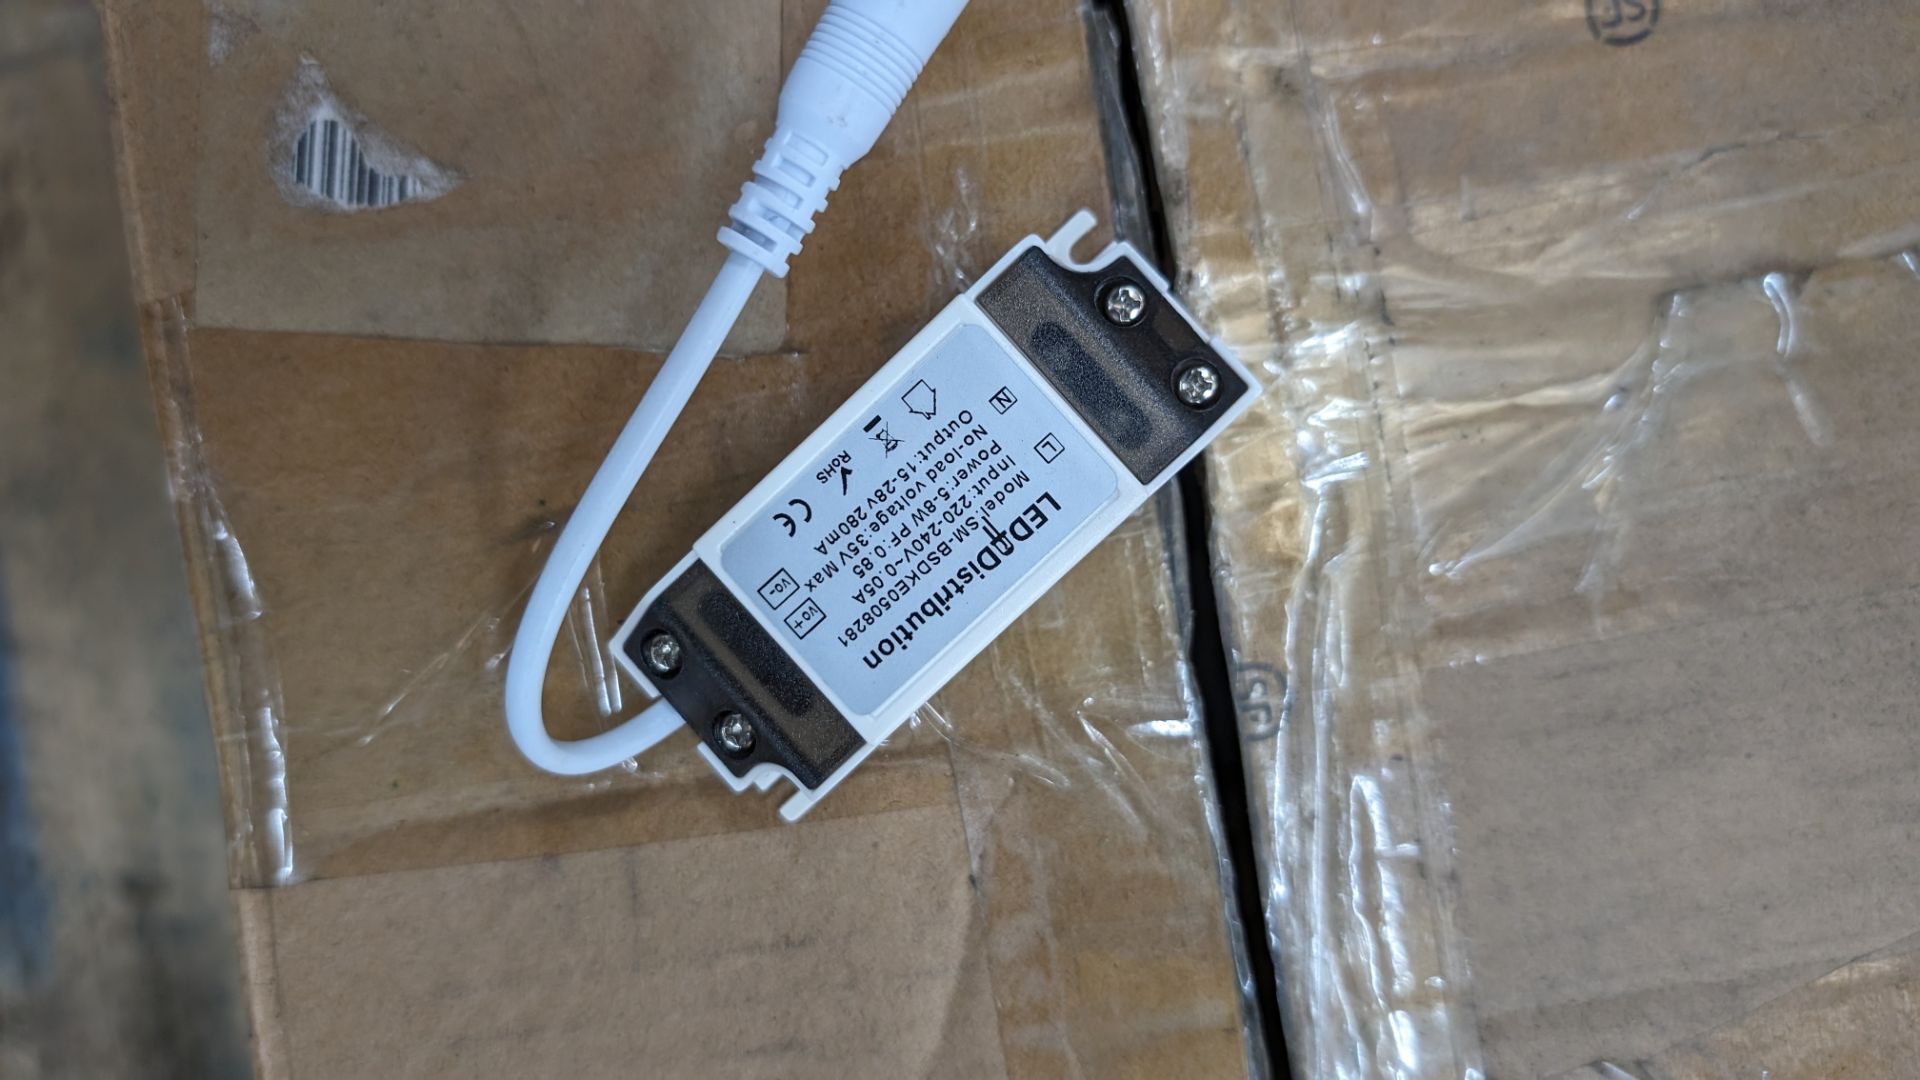 Approximately 59 off 5-8w LED drivers, output 15-28v - 1 carton - Image 4 of 5